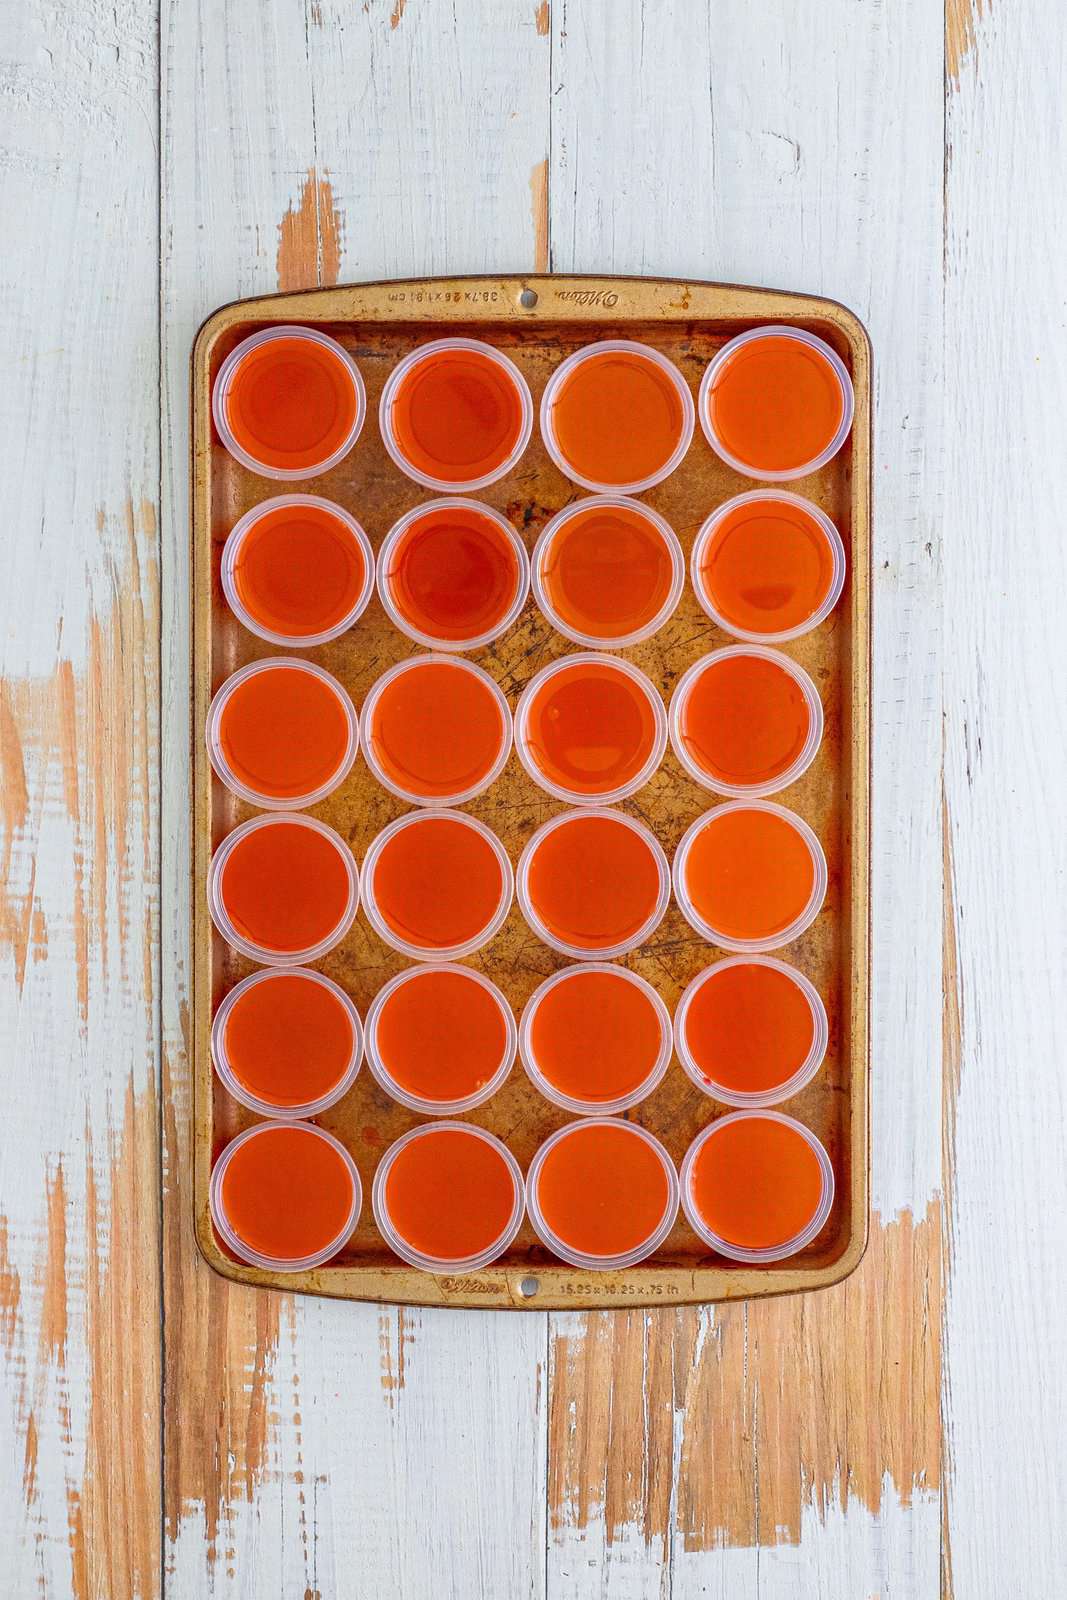 Looking down on cups of layered orange and cherry jello shots in cups.